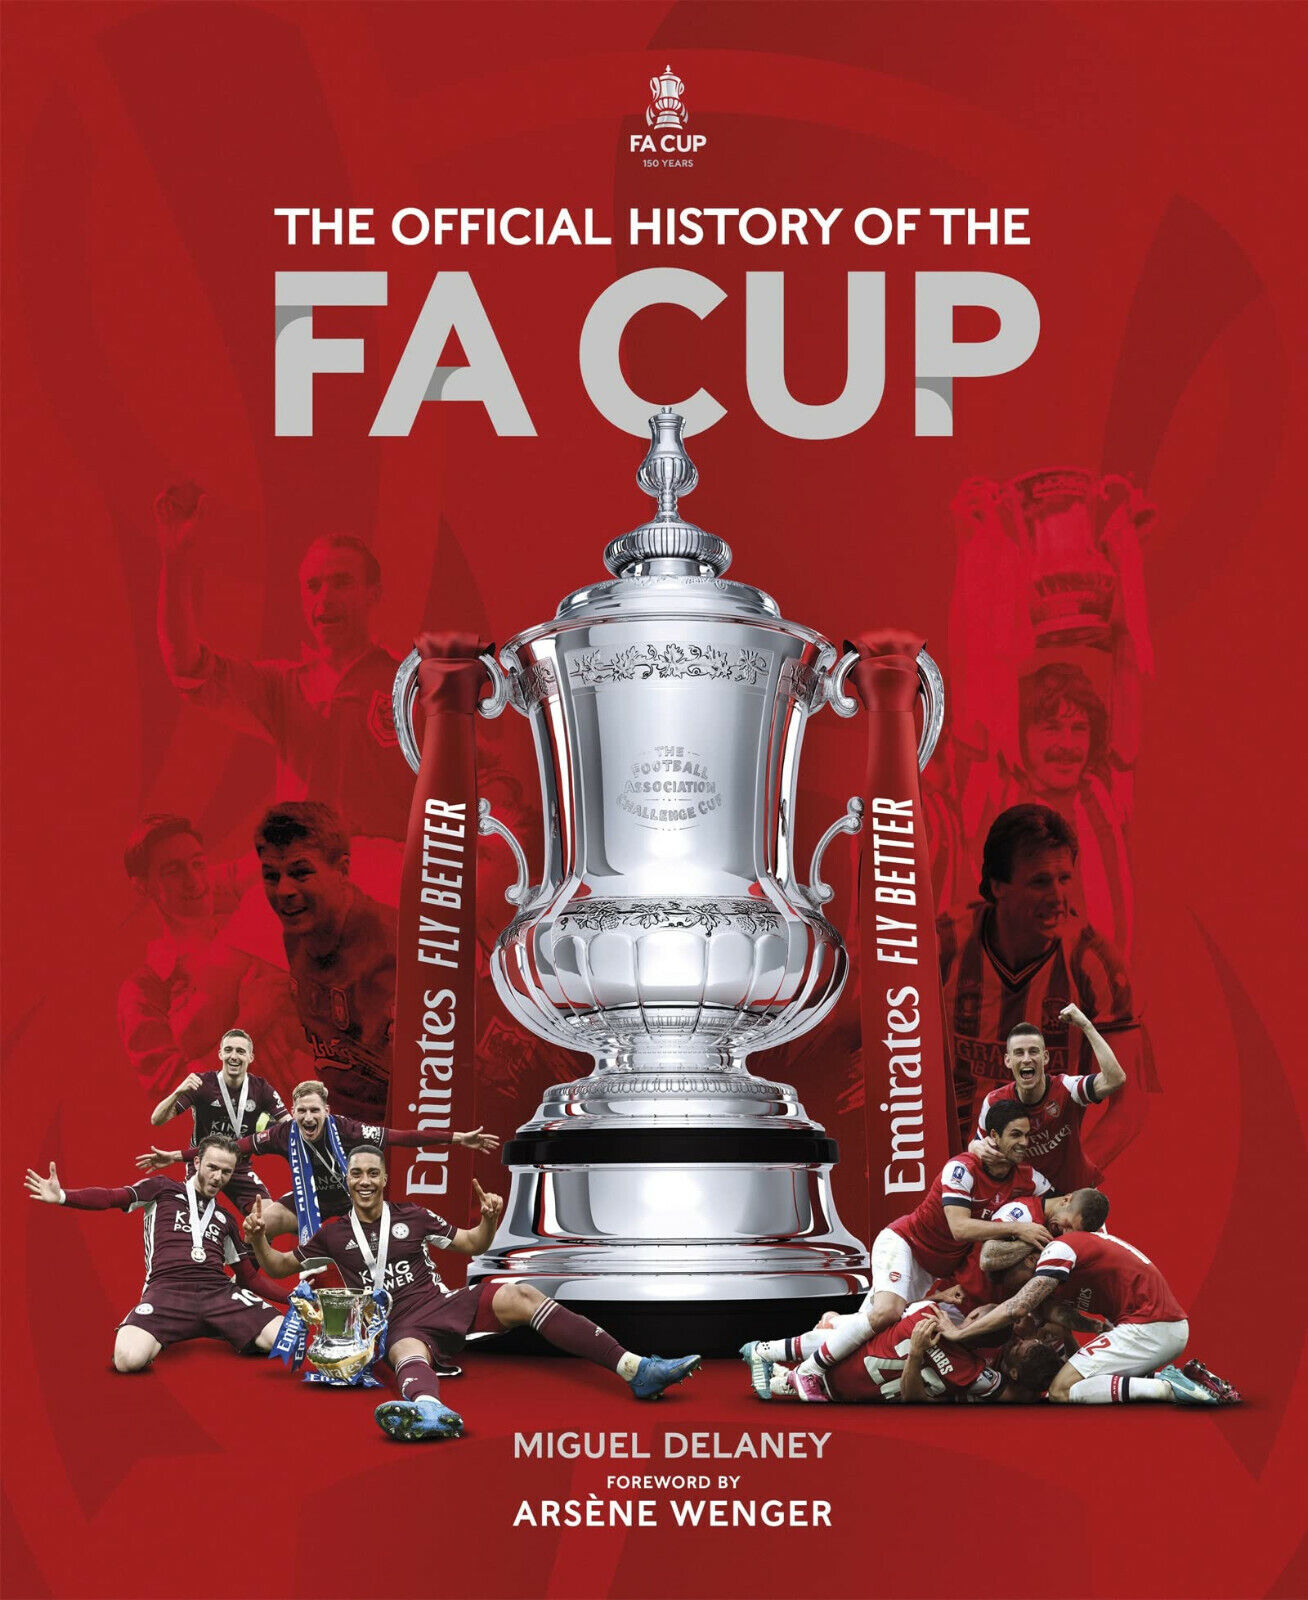 The Official History of the Fa Cup - MIGUEL DELANEY - CARLTON/WELBECK, 2022